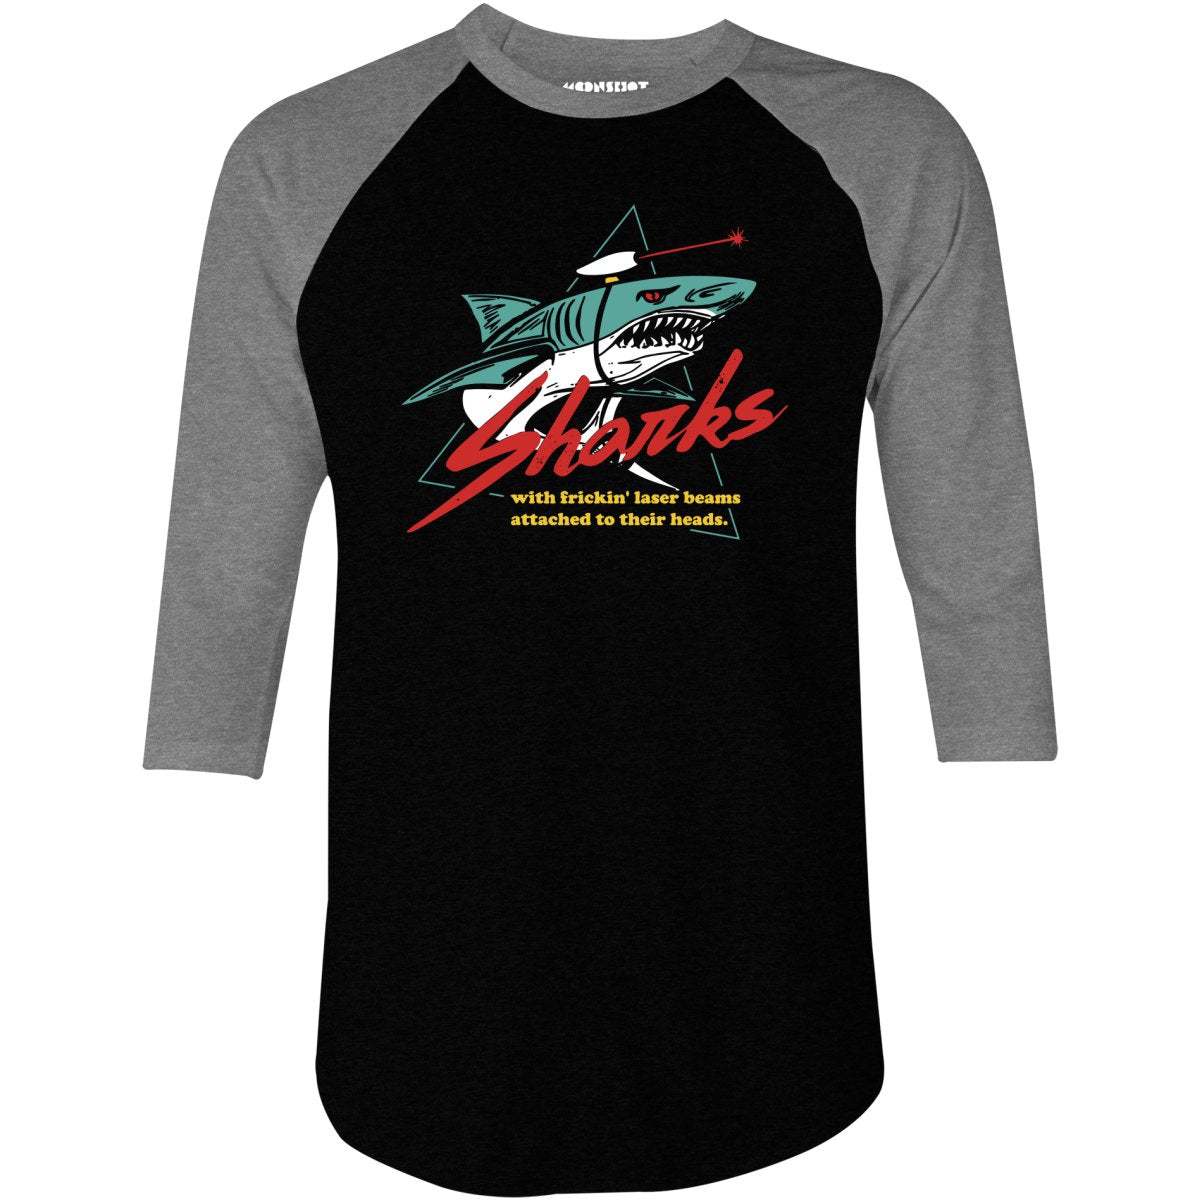 Sharks With Frickin' Laser Beams Attached to Their Heads - 3/4 Sleeve Raglan T-Shirt